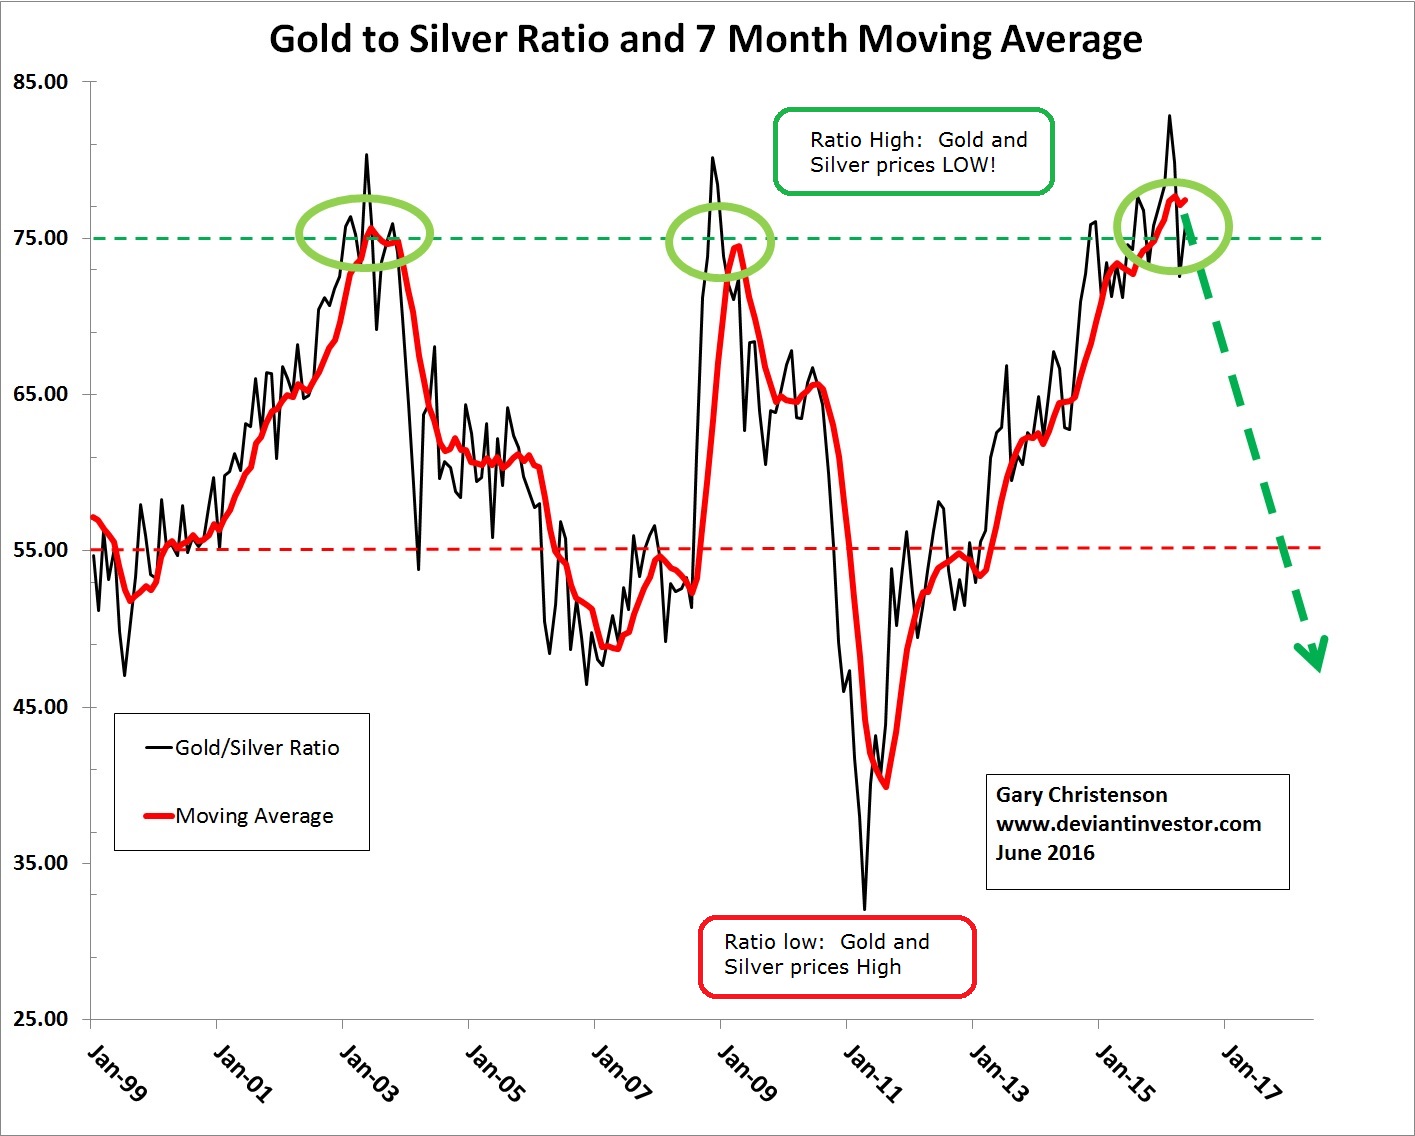 GOld To Silver Ratio And 7 Month Moving Average